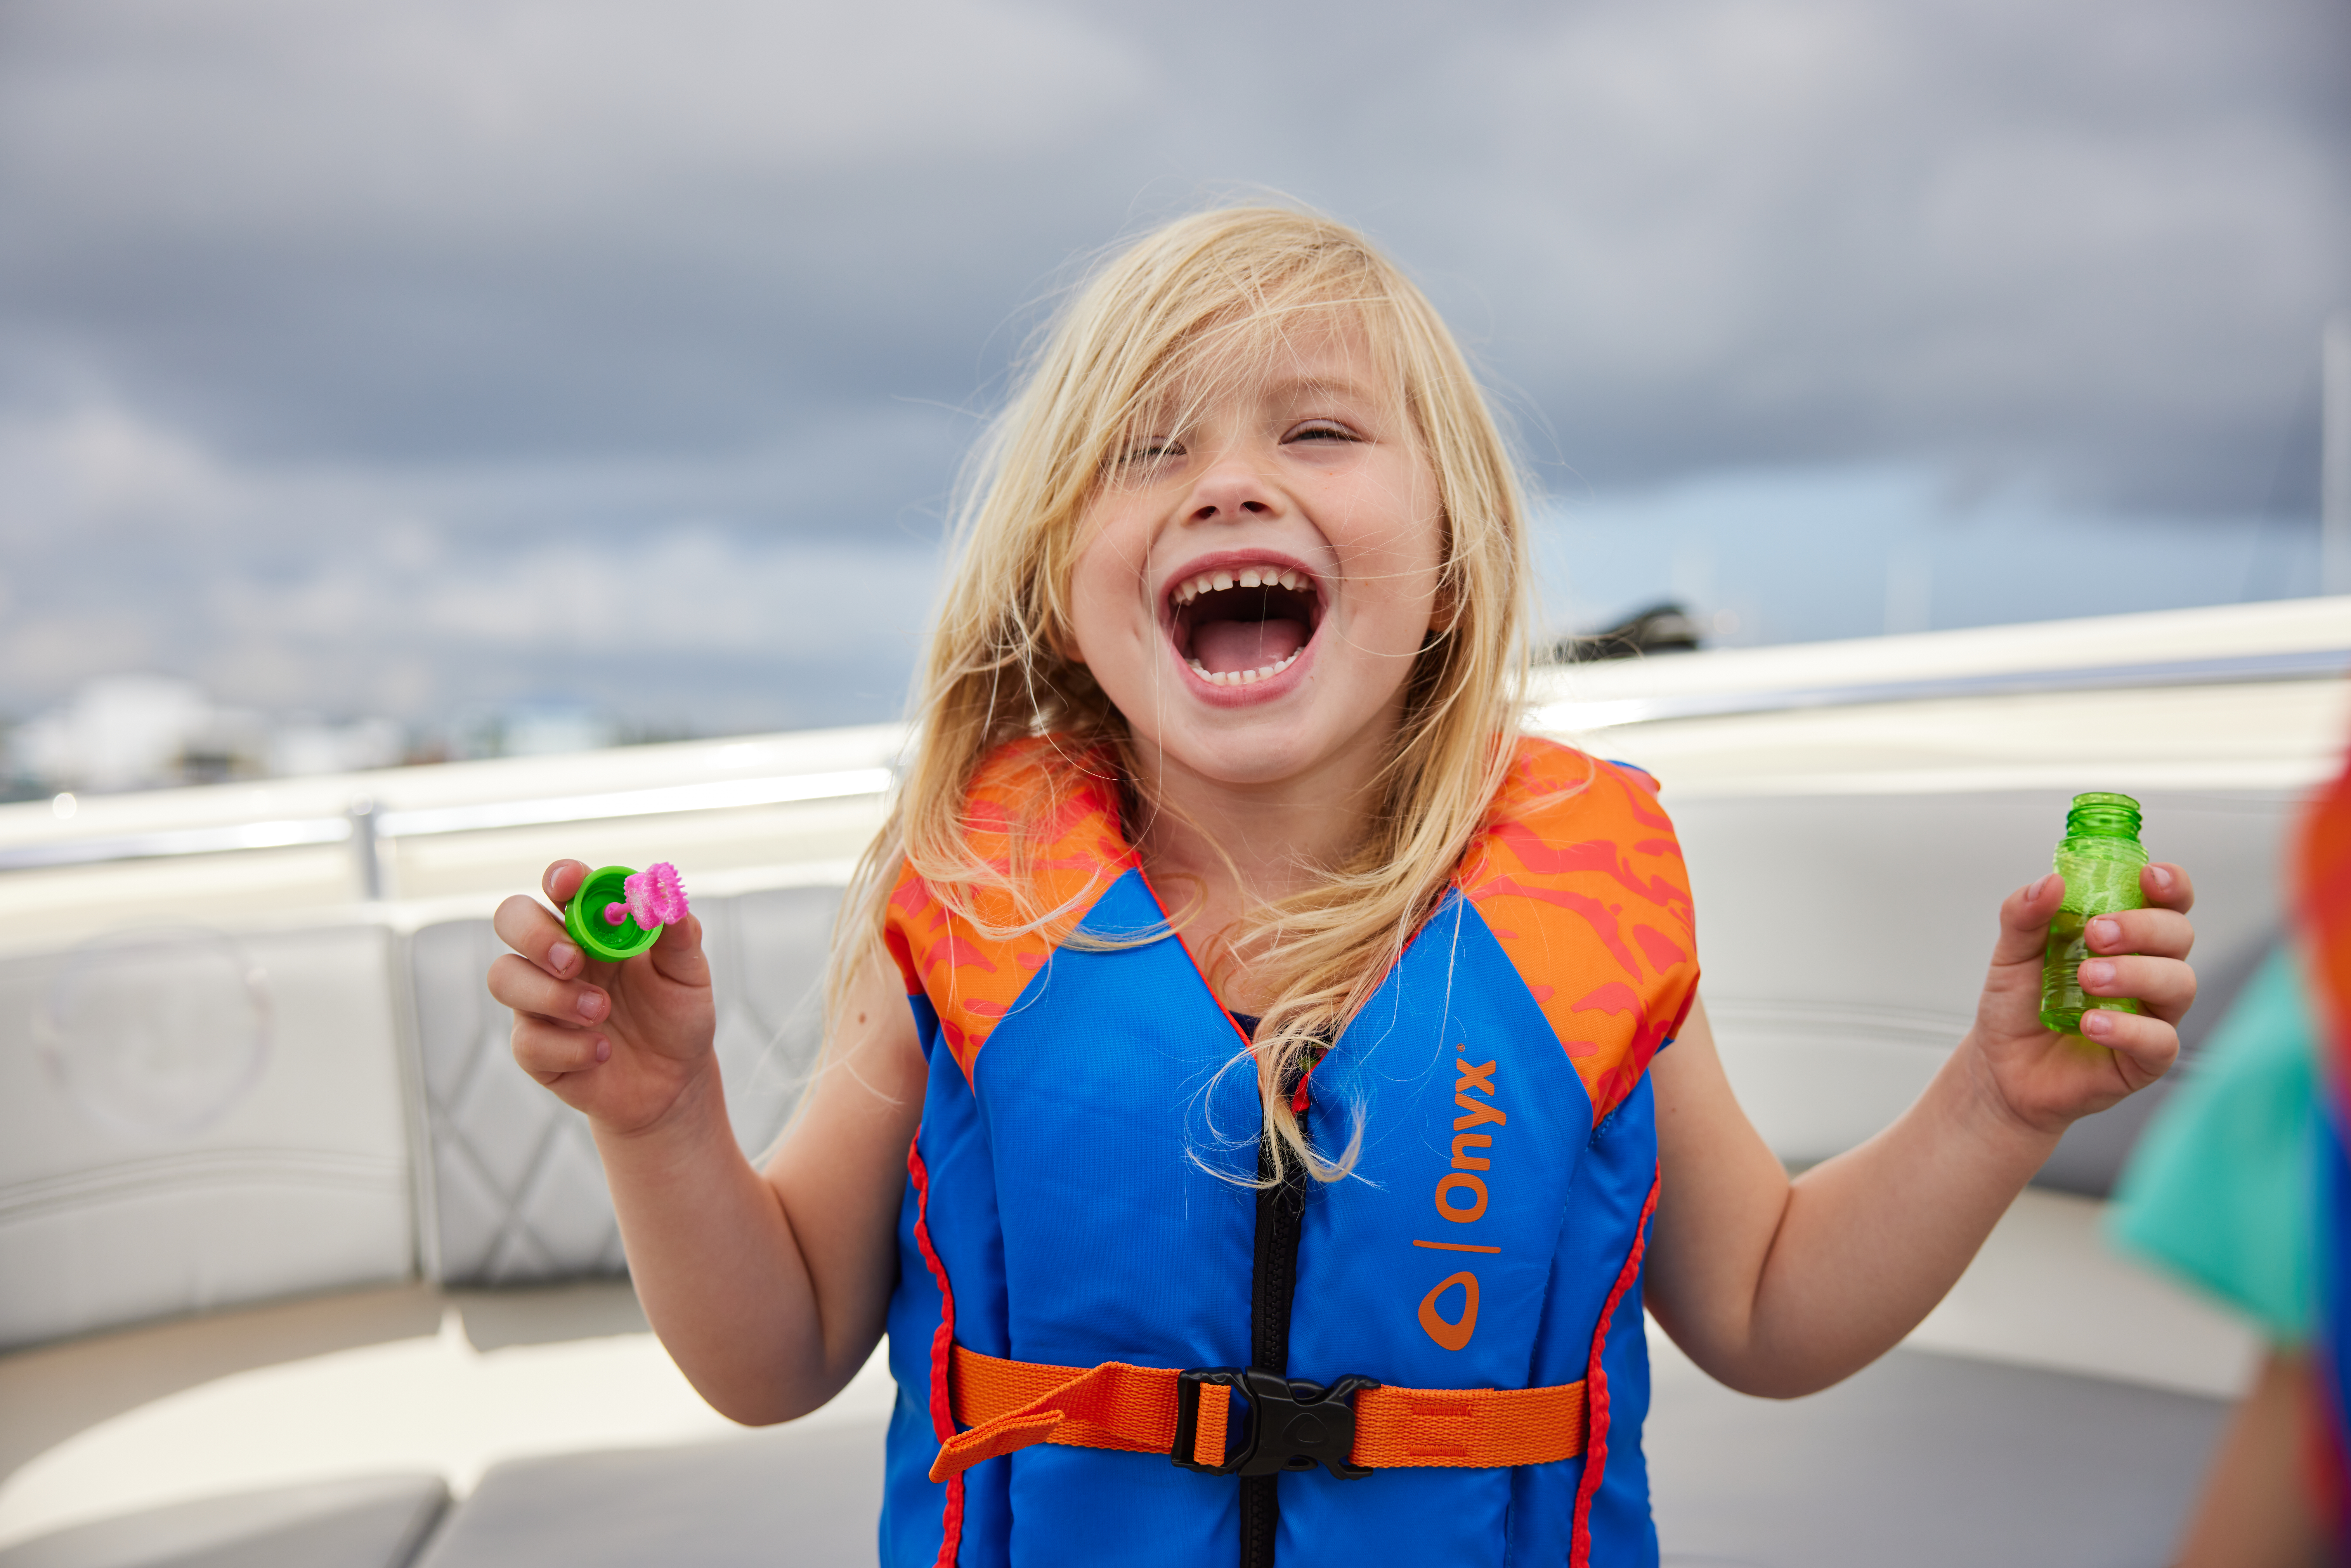 A young girl wearing a life jacket and blowing bubbles on a boat, July 4th Weekend concept. 